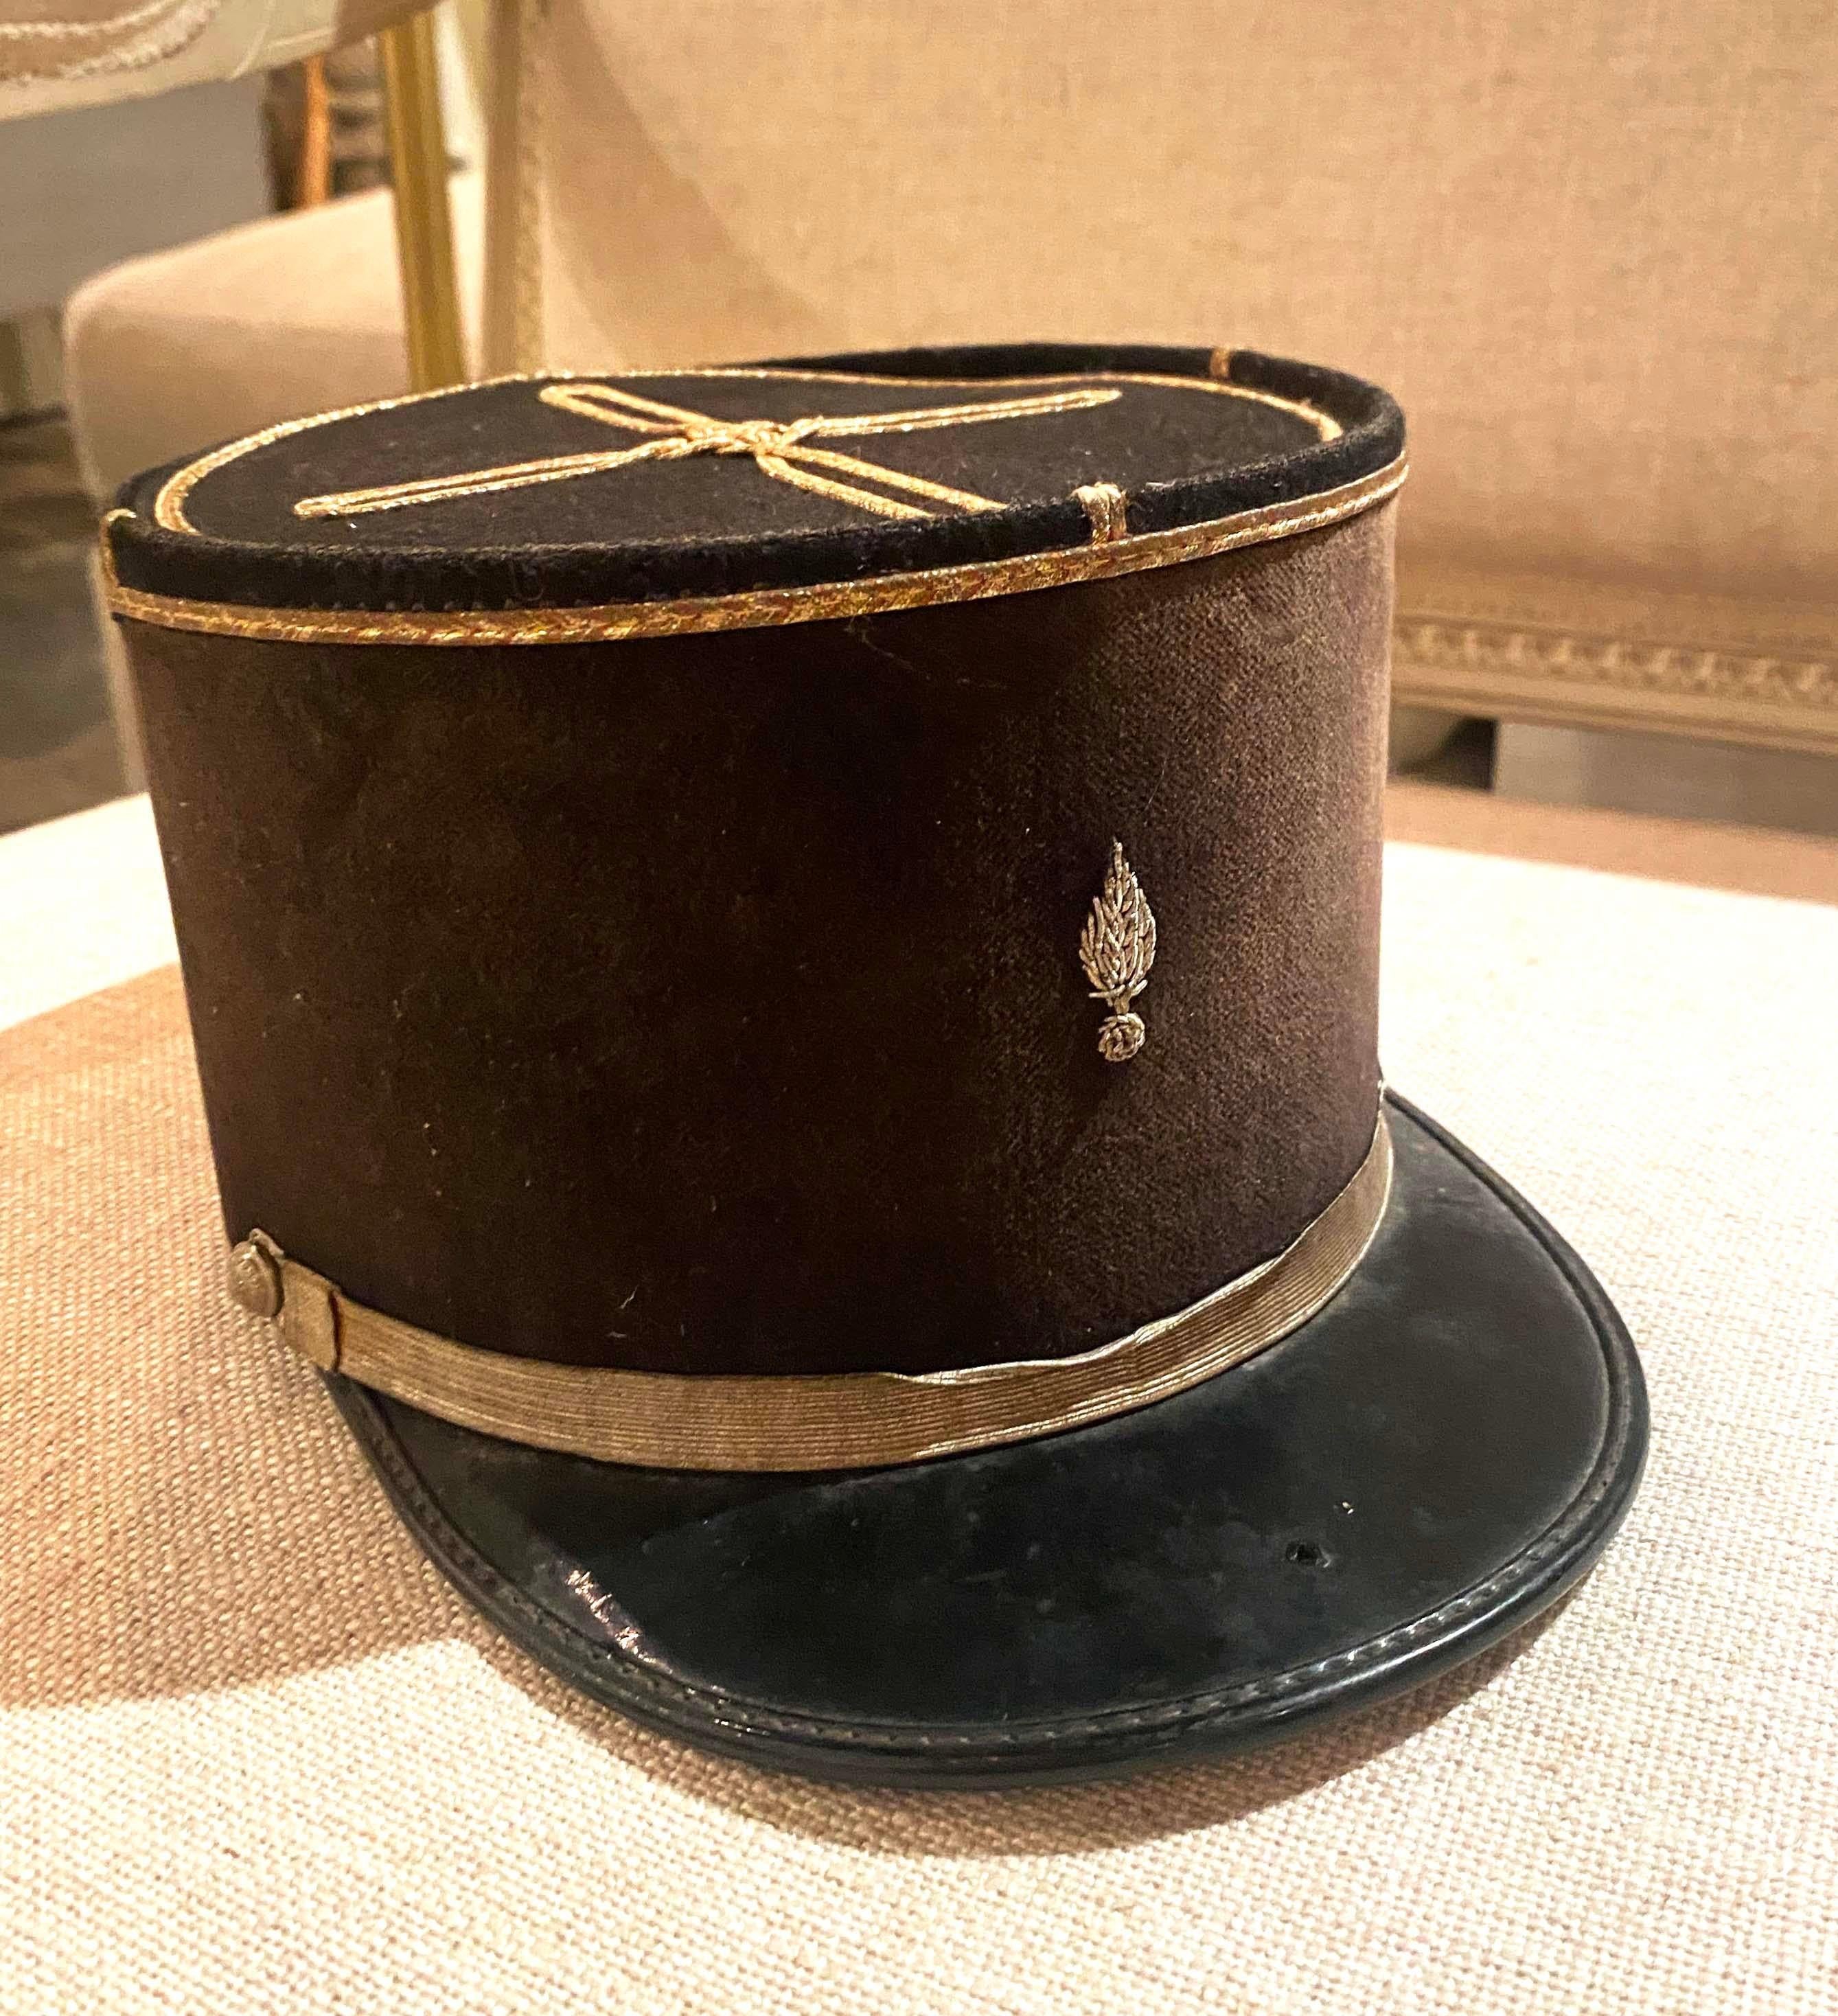 This is a vintage French Kepi/Hat was acquired on a buying trip to France in 2019. In black felt with black plastic peak, gold braid. Made by Balsan Paris, as printed to the interior of the top. Gold braid runs around the top of the Hat with a gold